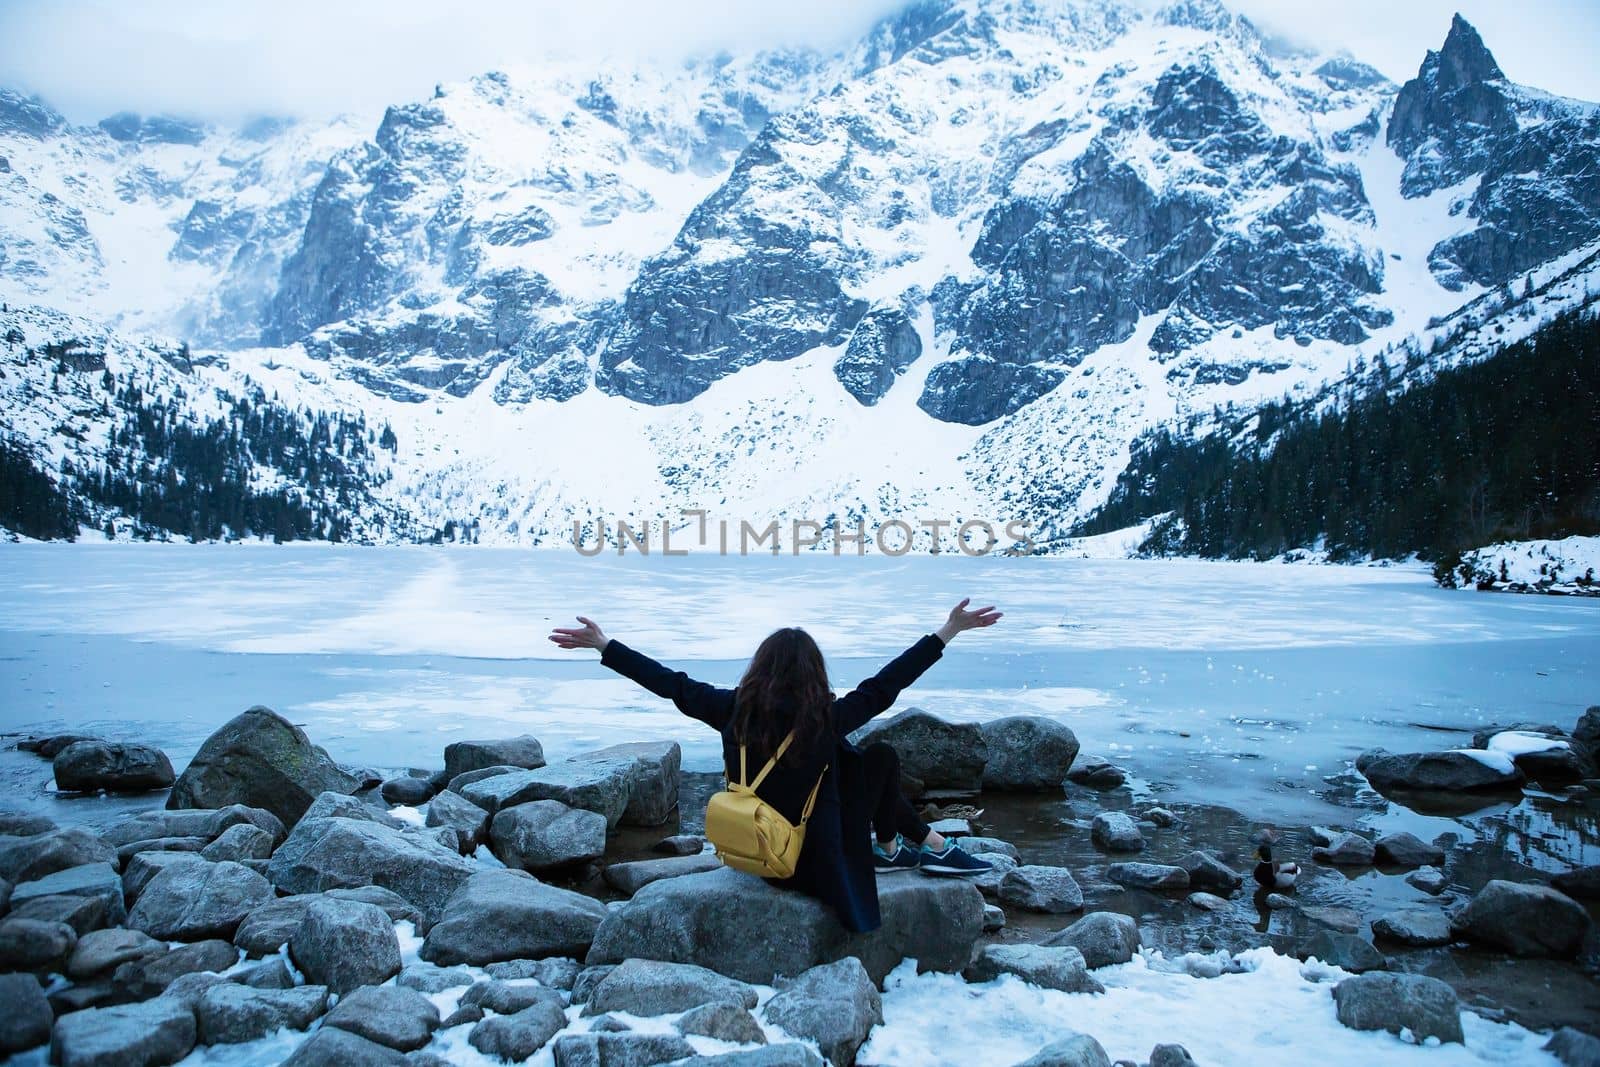 Picturesque and beautiful view of the mountains. Sea eye. The girl is sitting on a stone